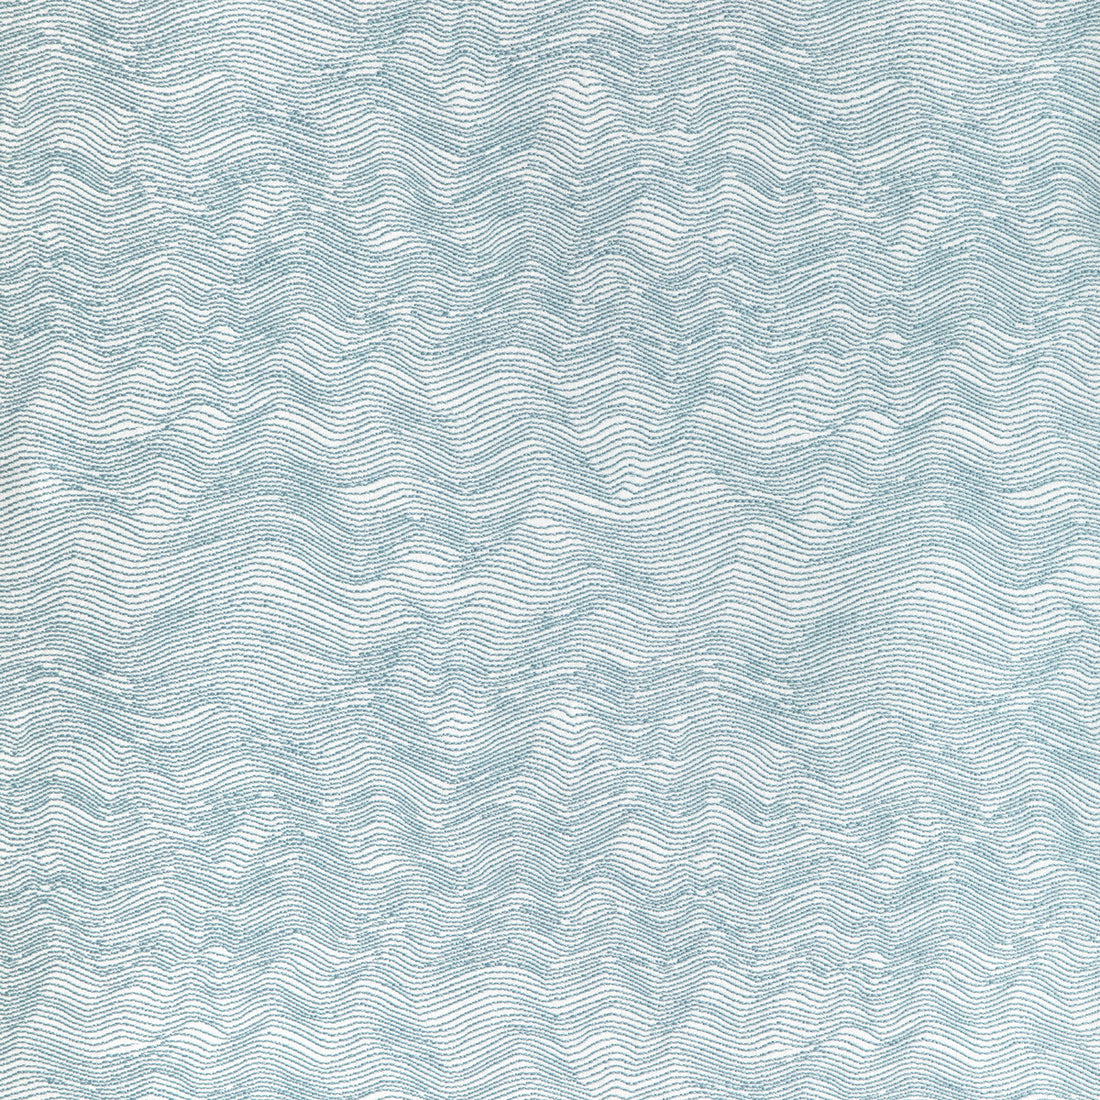 Watery Motion fabric in spray color - pattern 37056.15.0 - by Kravet Design in the Thom Filicia Latitude collection